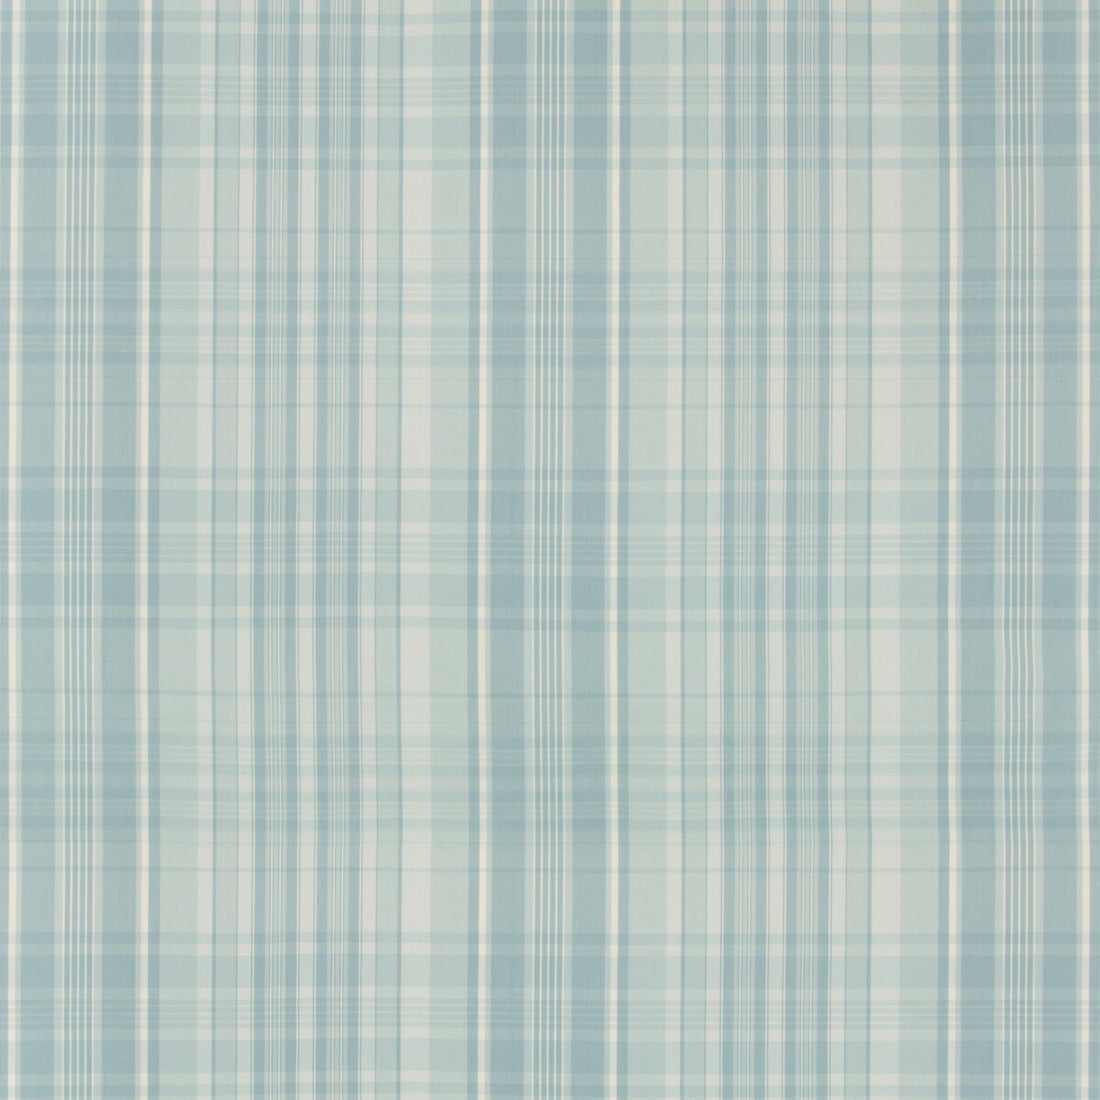 Guernsey Check fabric in aqua color - pattern 8019101.13.0 - by Brunschwig &amp; Fils in the Normant Checks And Stripes collection